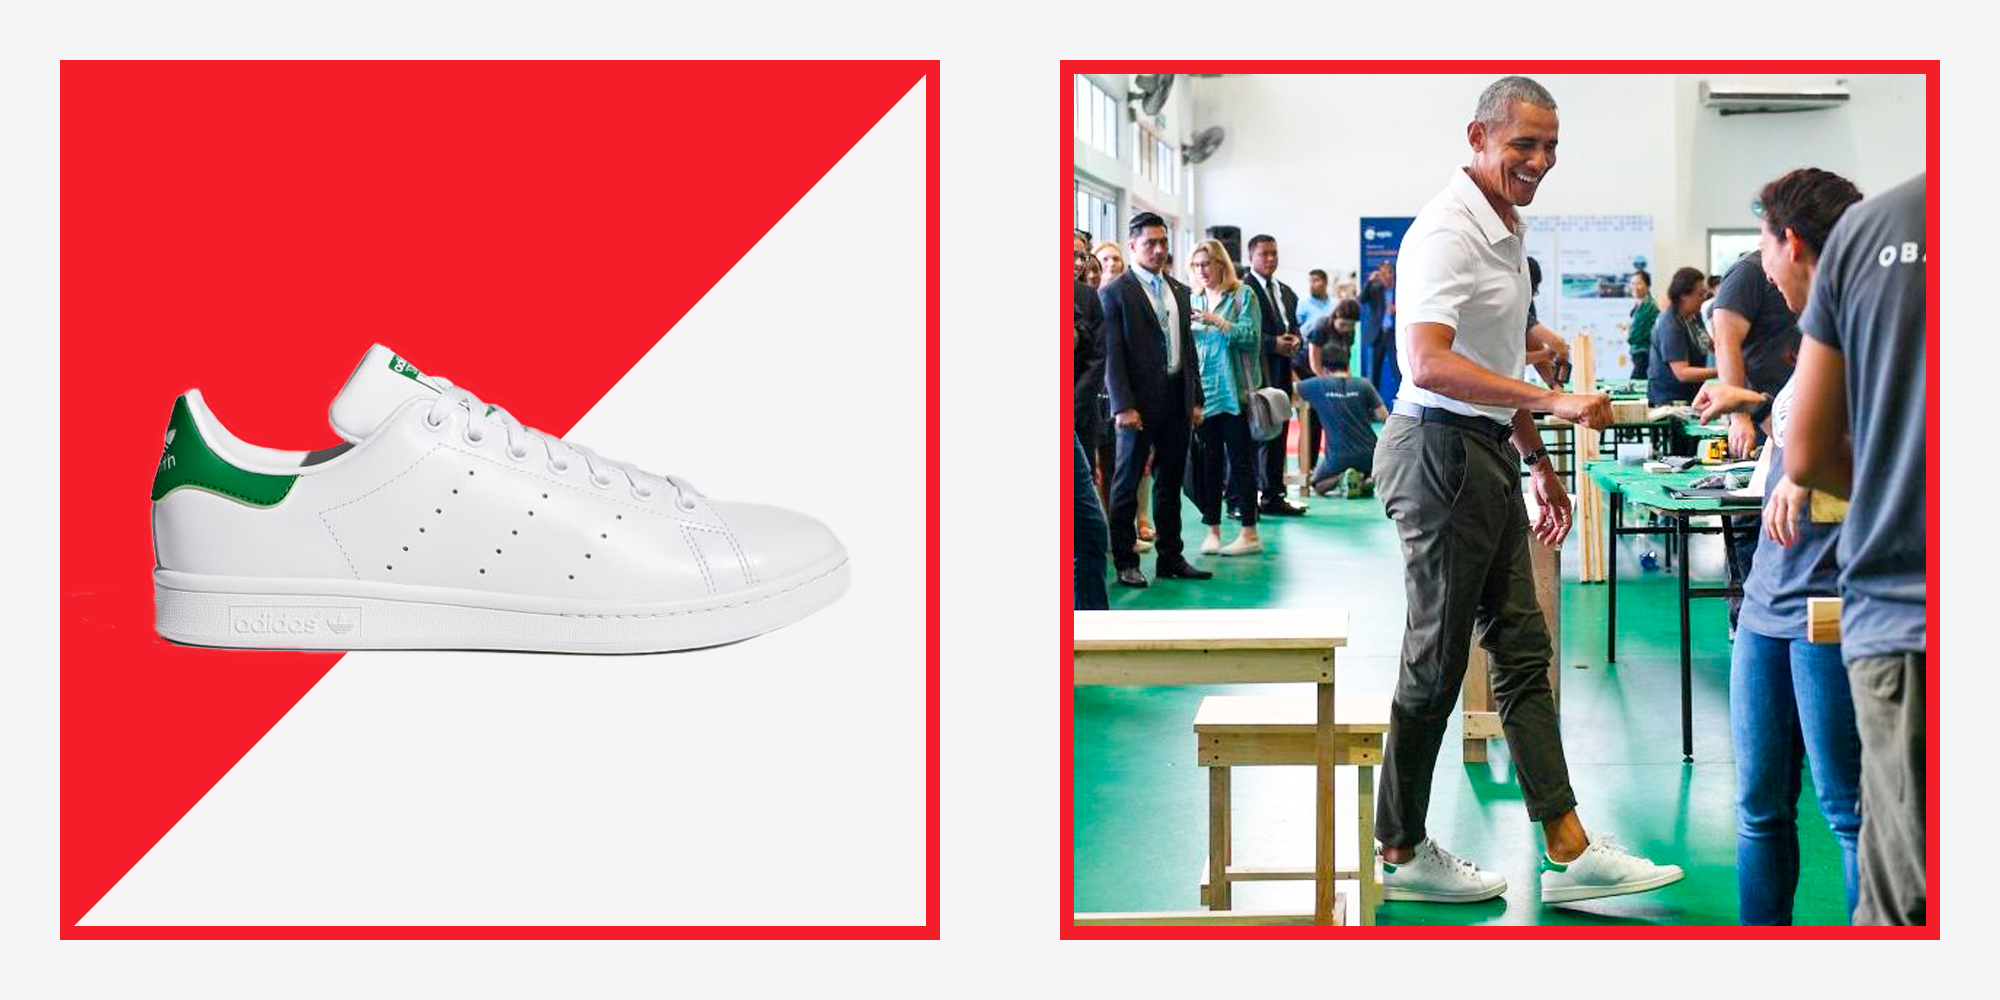 Barack Obama's Adidas Stan Smith Sneakers Prove He's a Style Icon